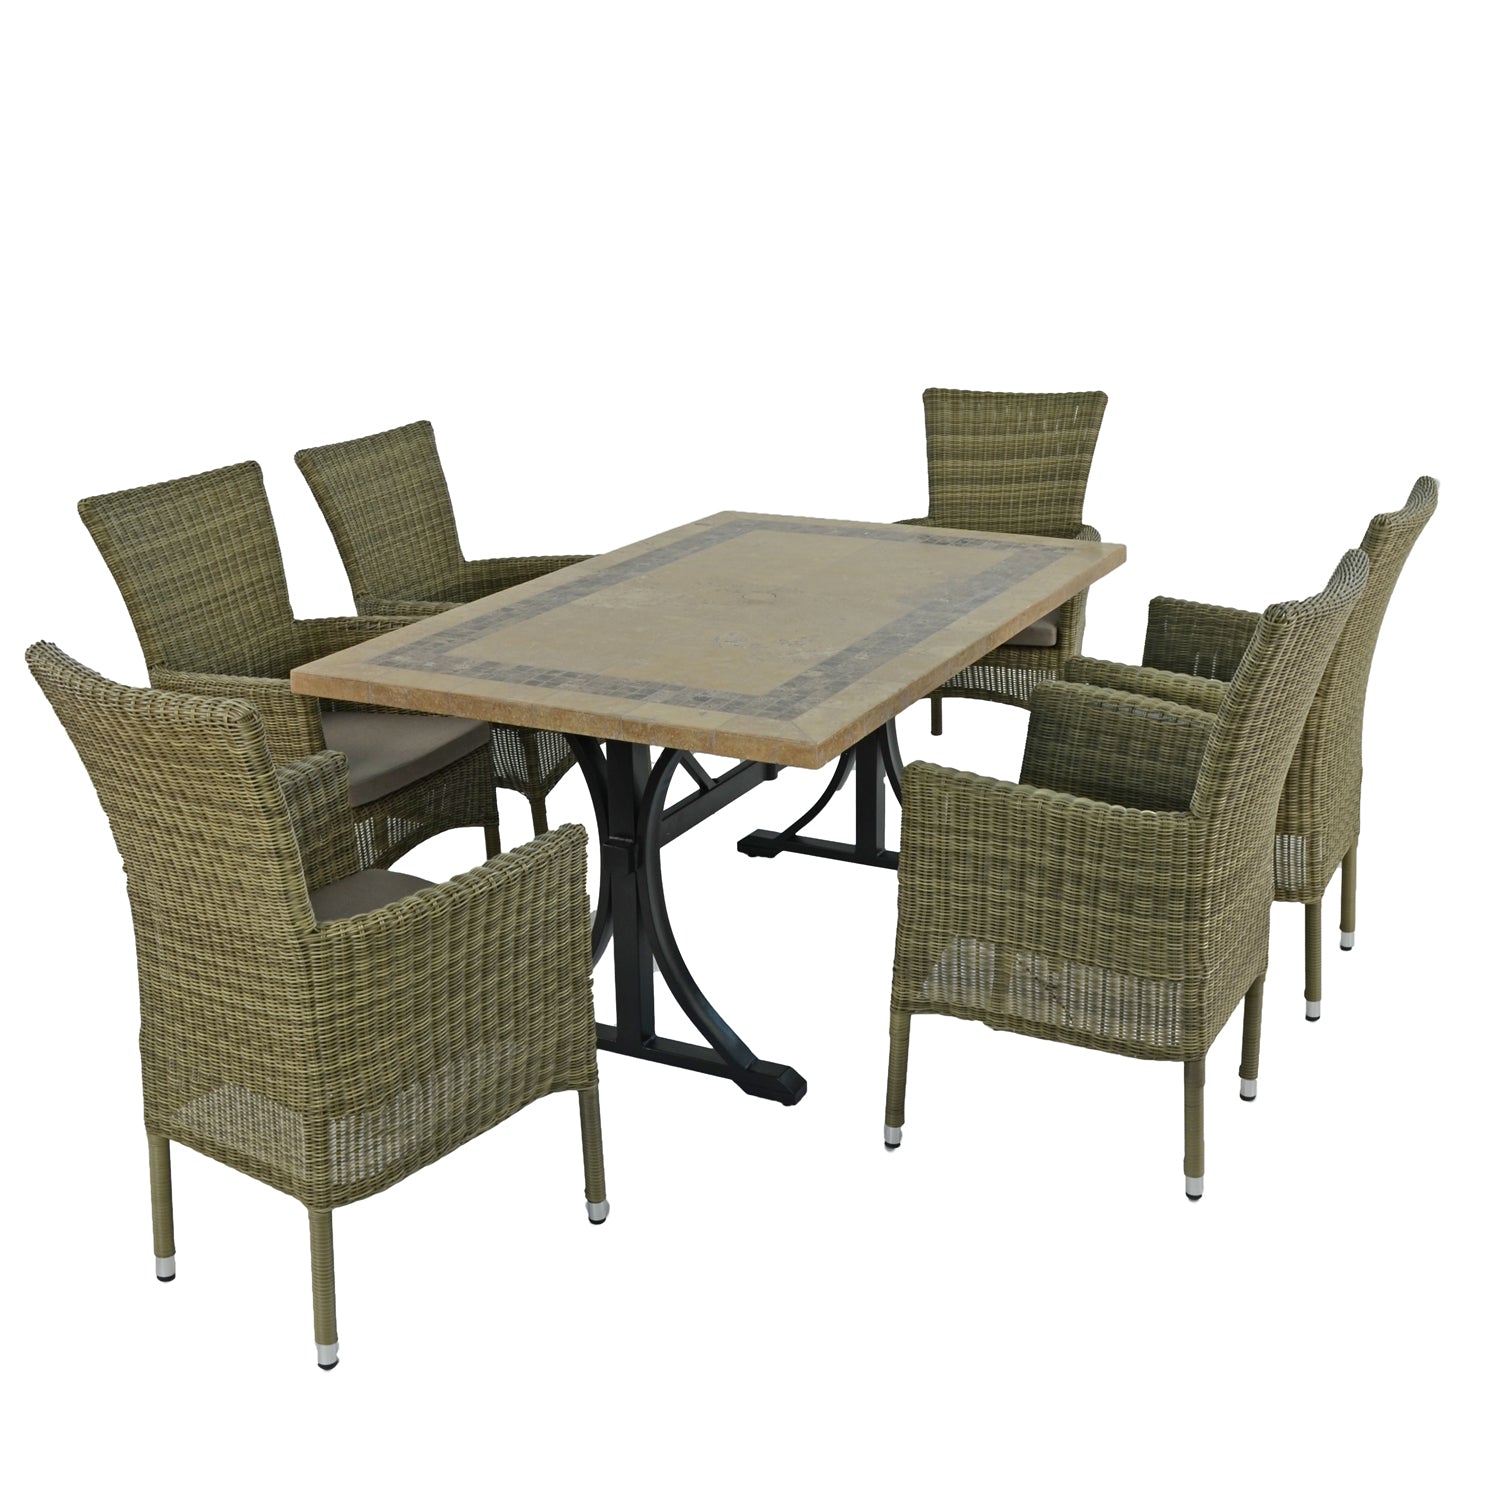 Byron Manor Charleston Stone Garden Dining Table with 6 Dorchester Wicker Chairs Set Dining Sets Byron Manor   